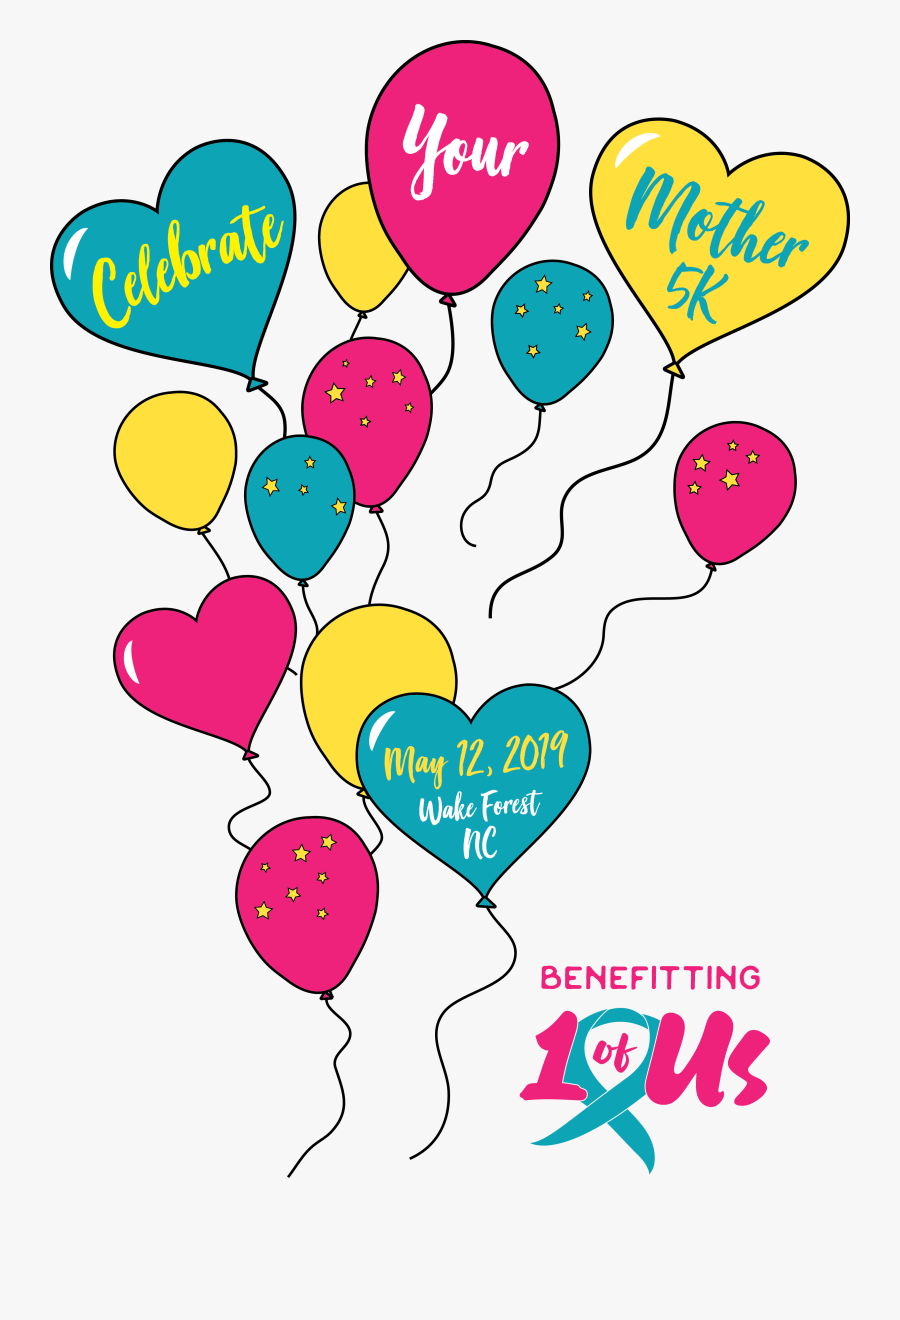 Celebrate Your Mother 5k - Balloon, Transparent Clipart